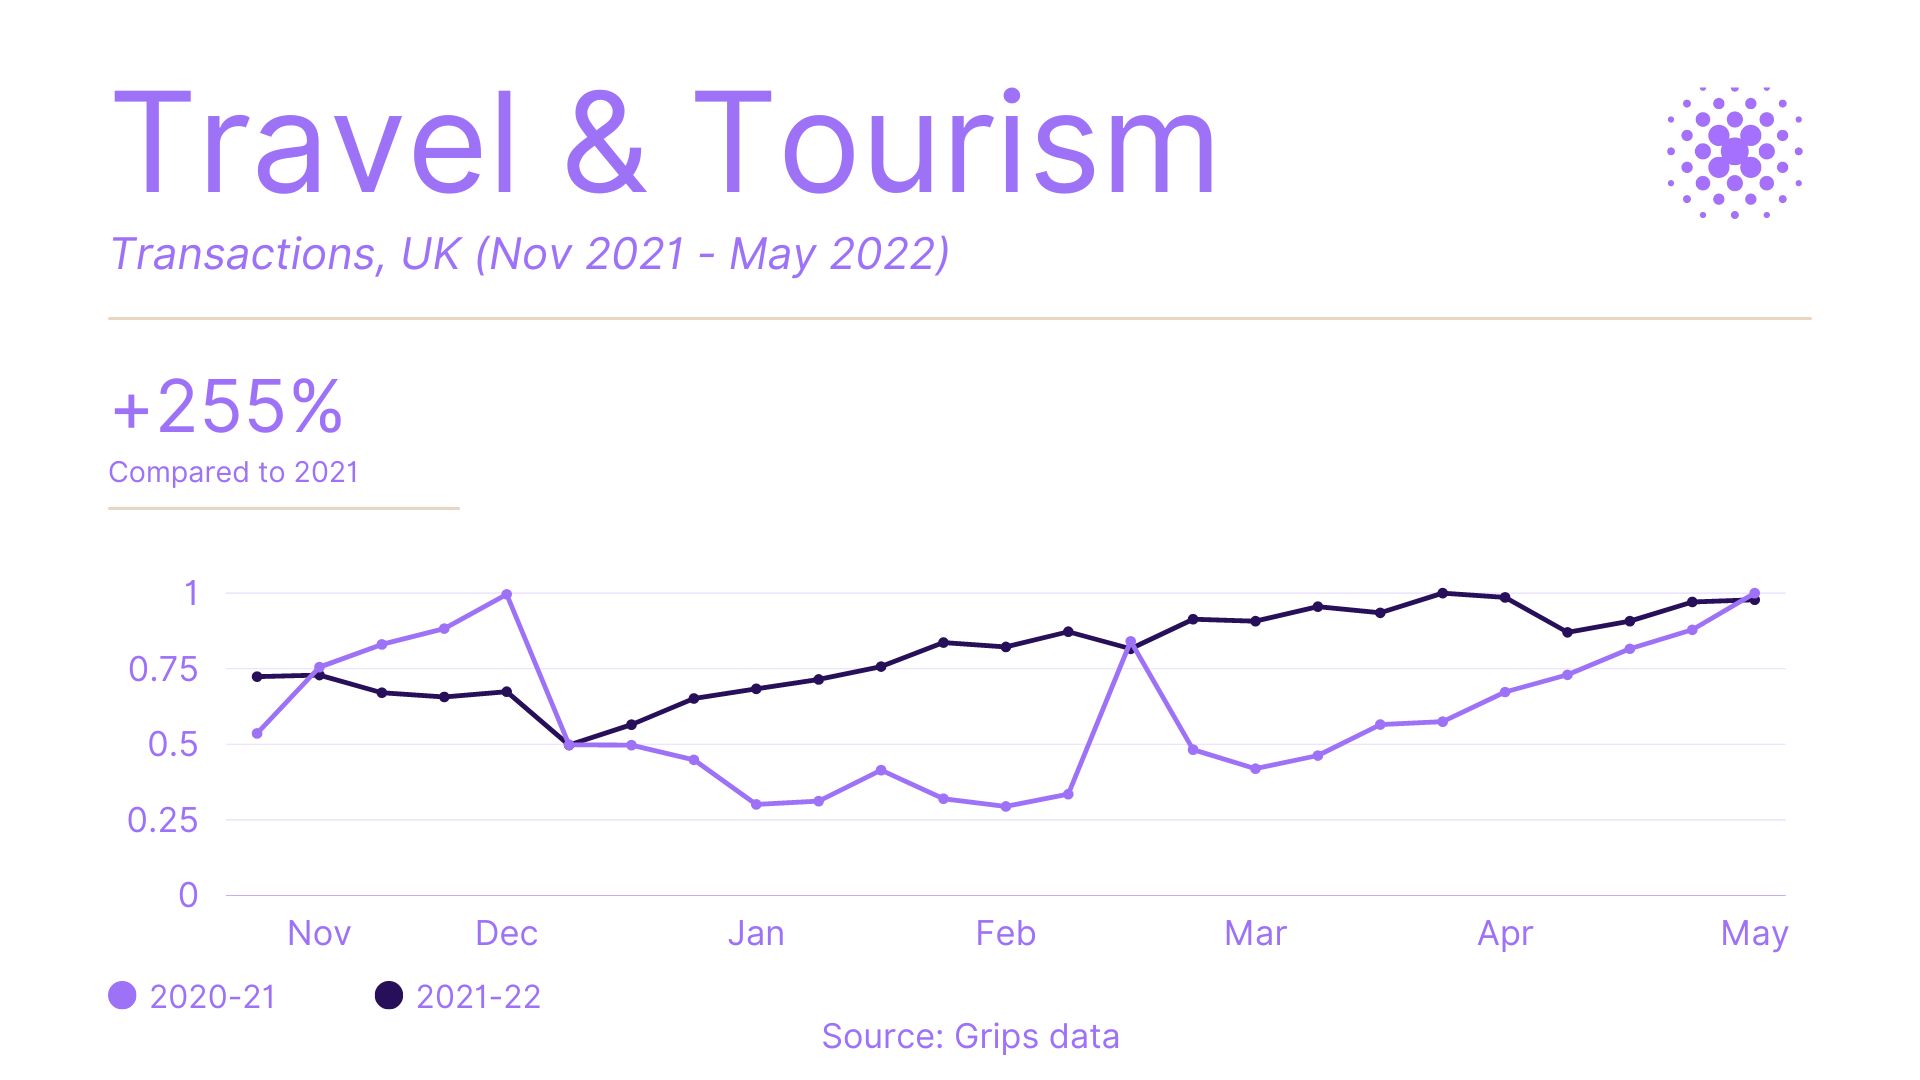 transactions in travel and tourism industry in the uk